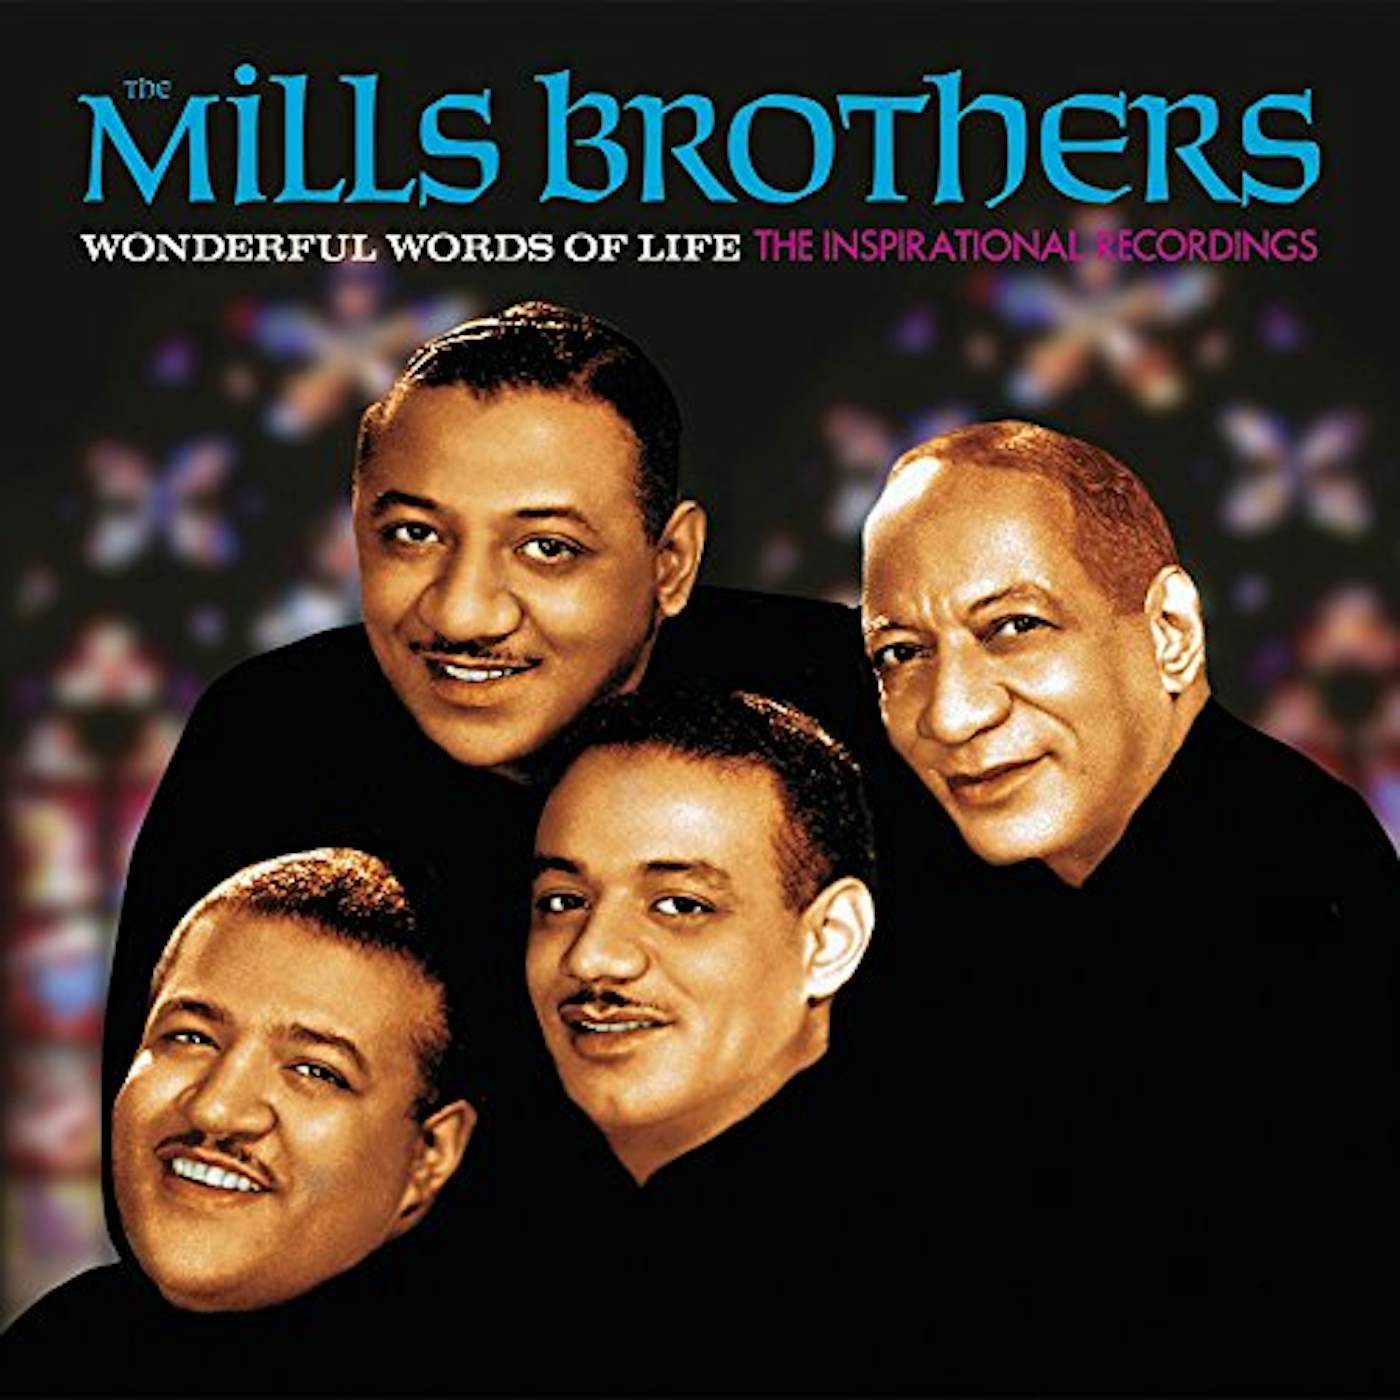 The Mills Brothers WONDERFUL WORDS OF LIFE - INSPIRATIONAL RECORDINGS CD